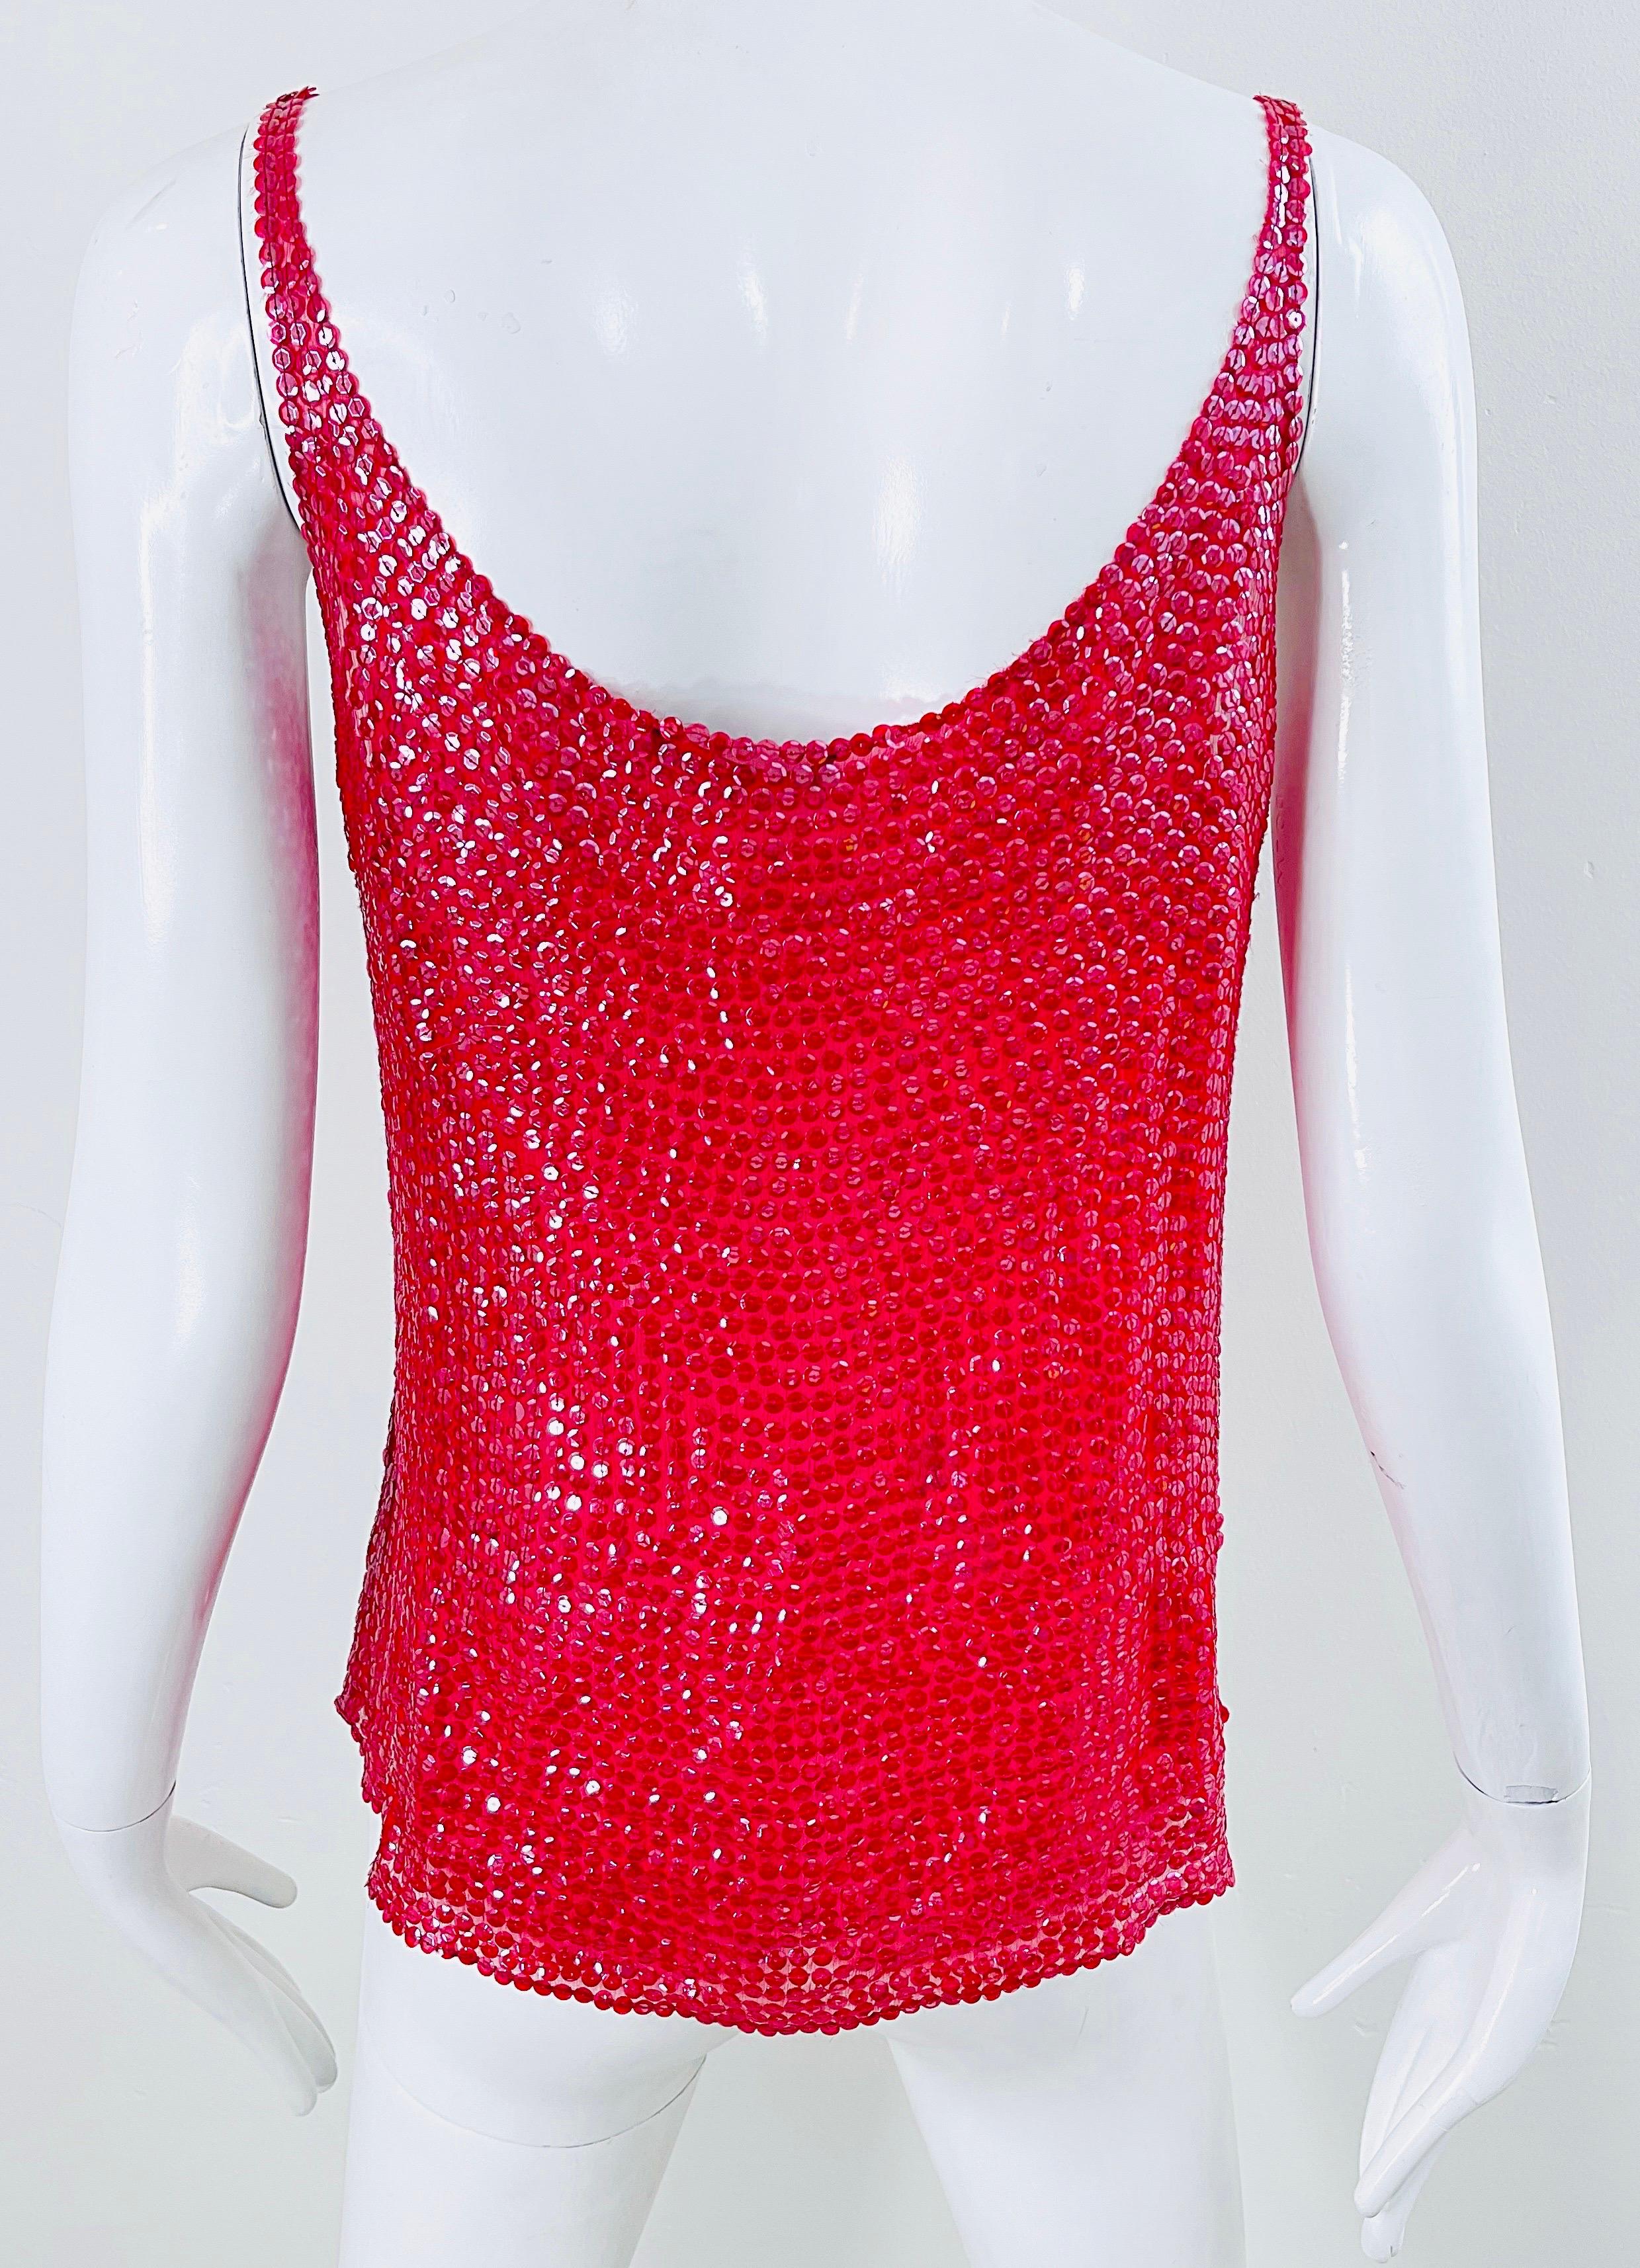 Women's Halston 1970s Lipstick Red Silk Chiffon Fully Sequin Vintage 70s Sleeveless Top For Sale